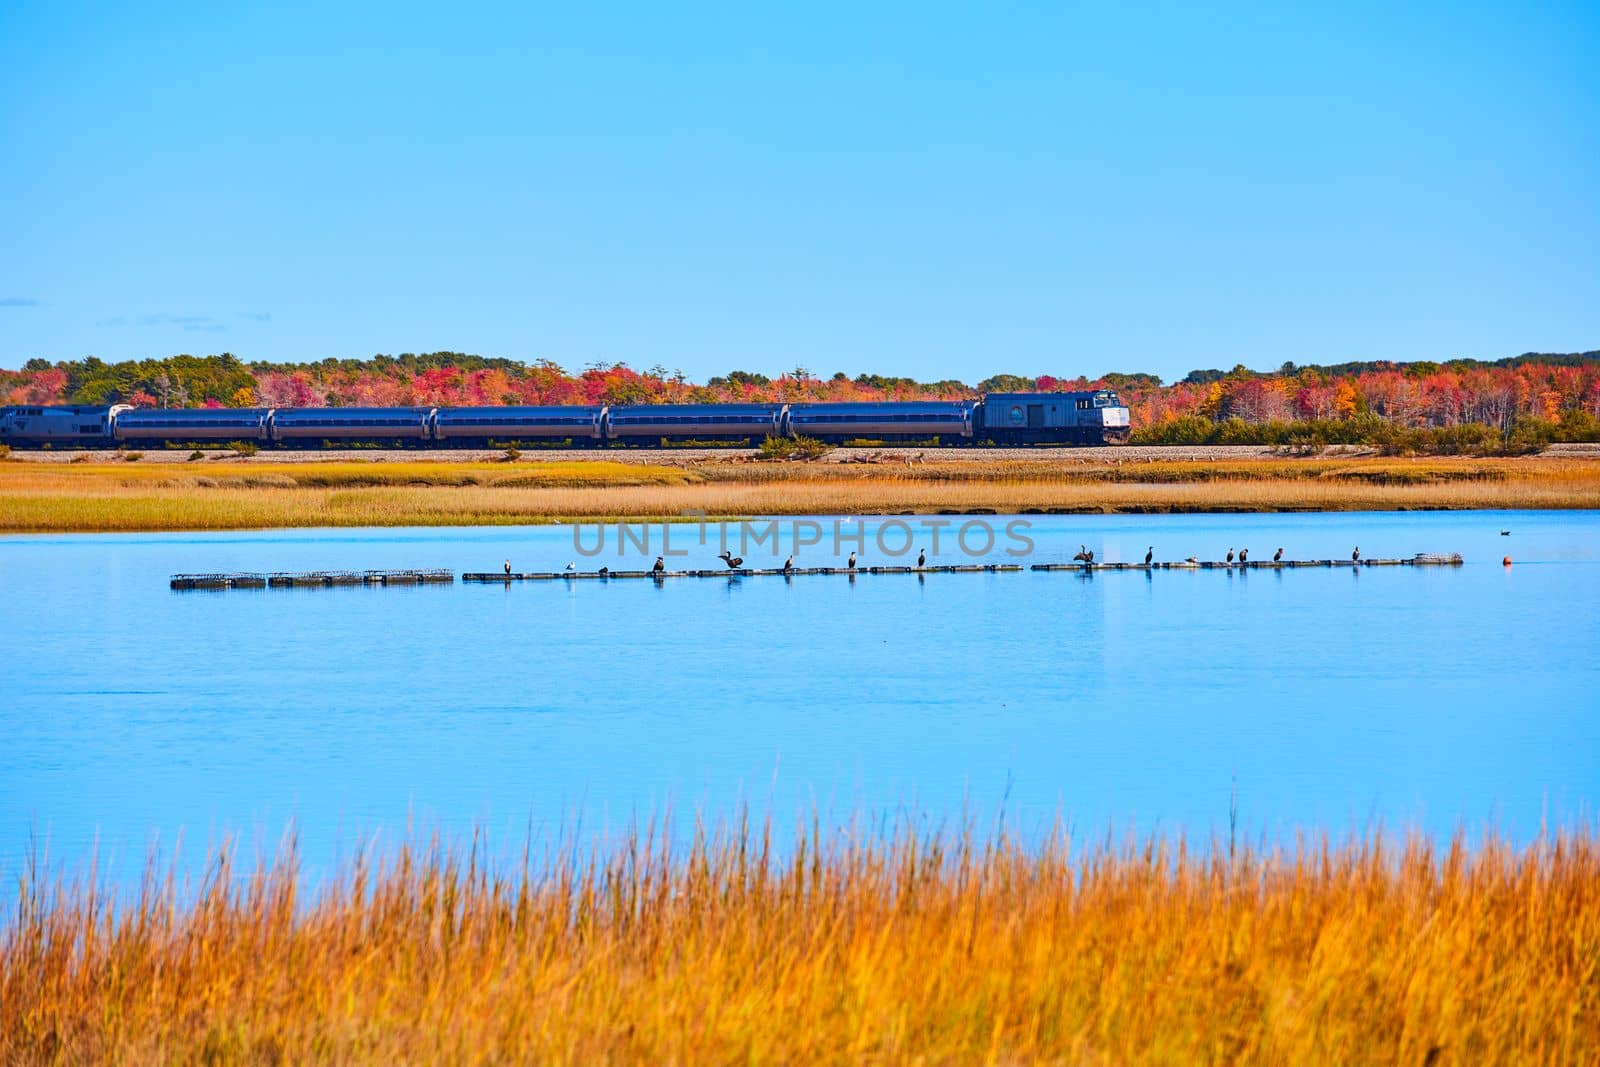 Image of Amtrak train going through marshes in Maine with birds on floating sticks